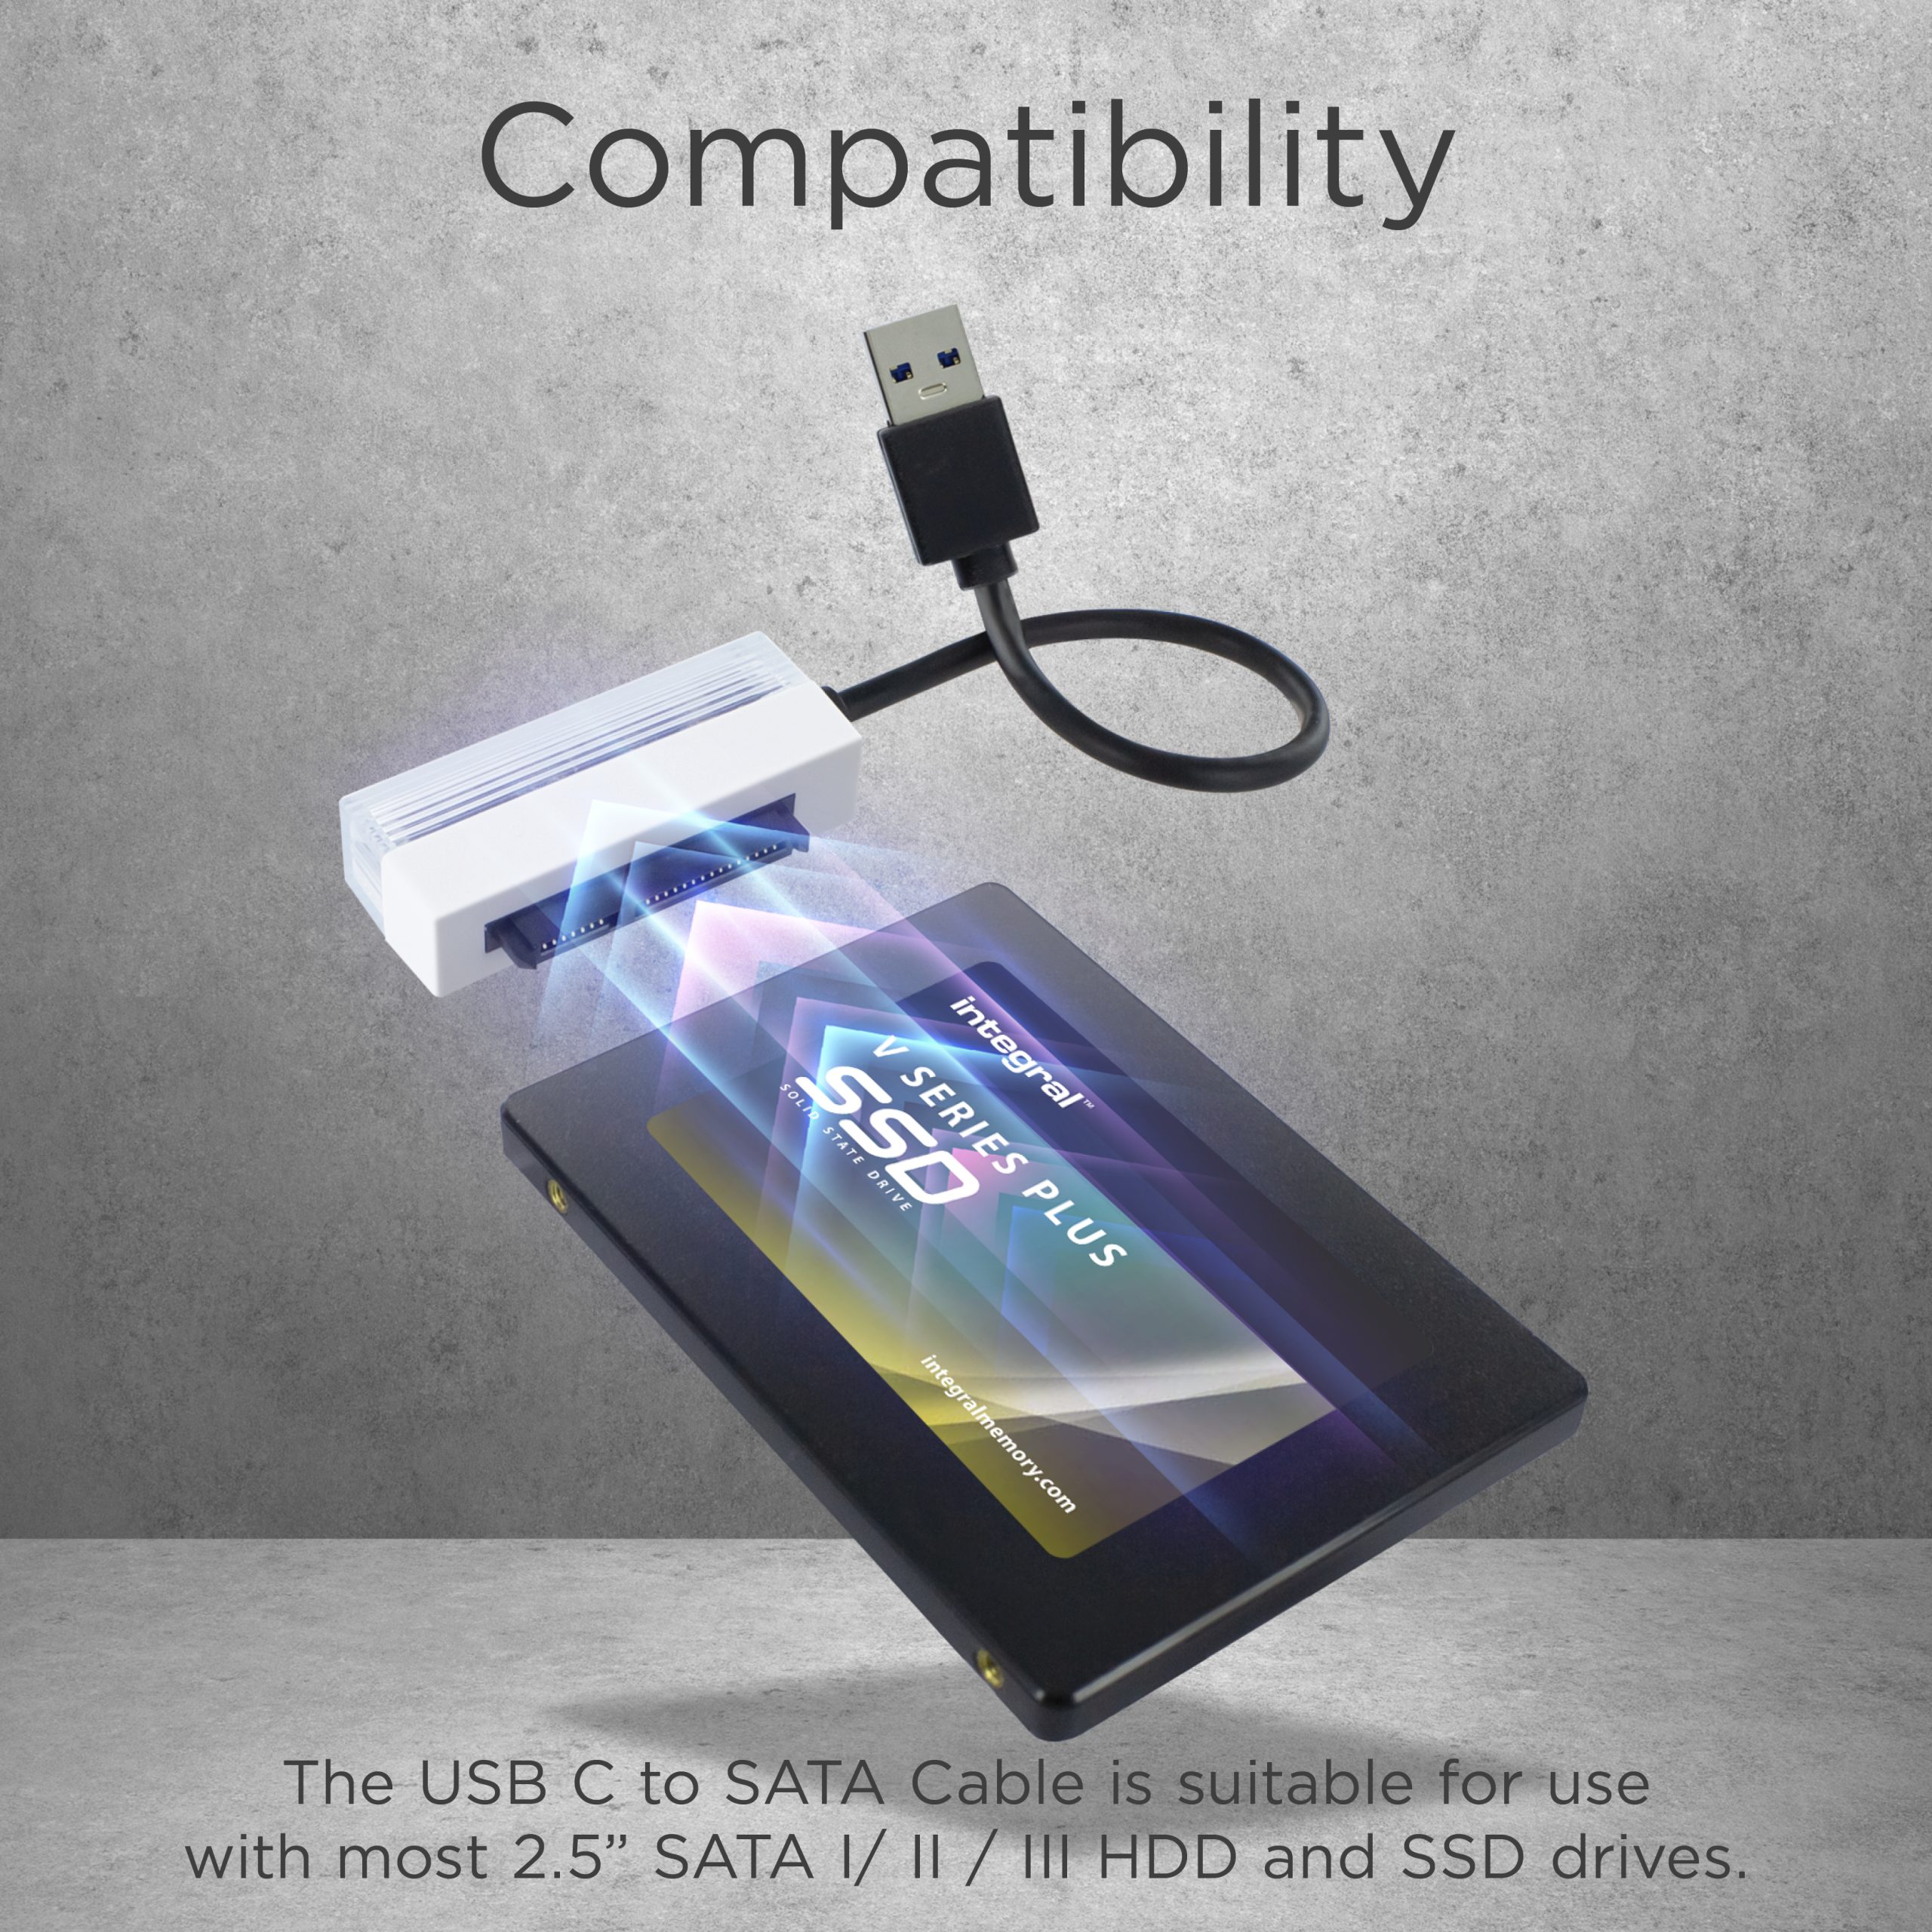 USB Type A TO 2.5” SATA III CONVERTER Compatibility